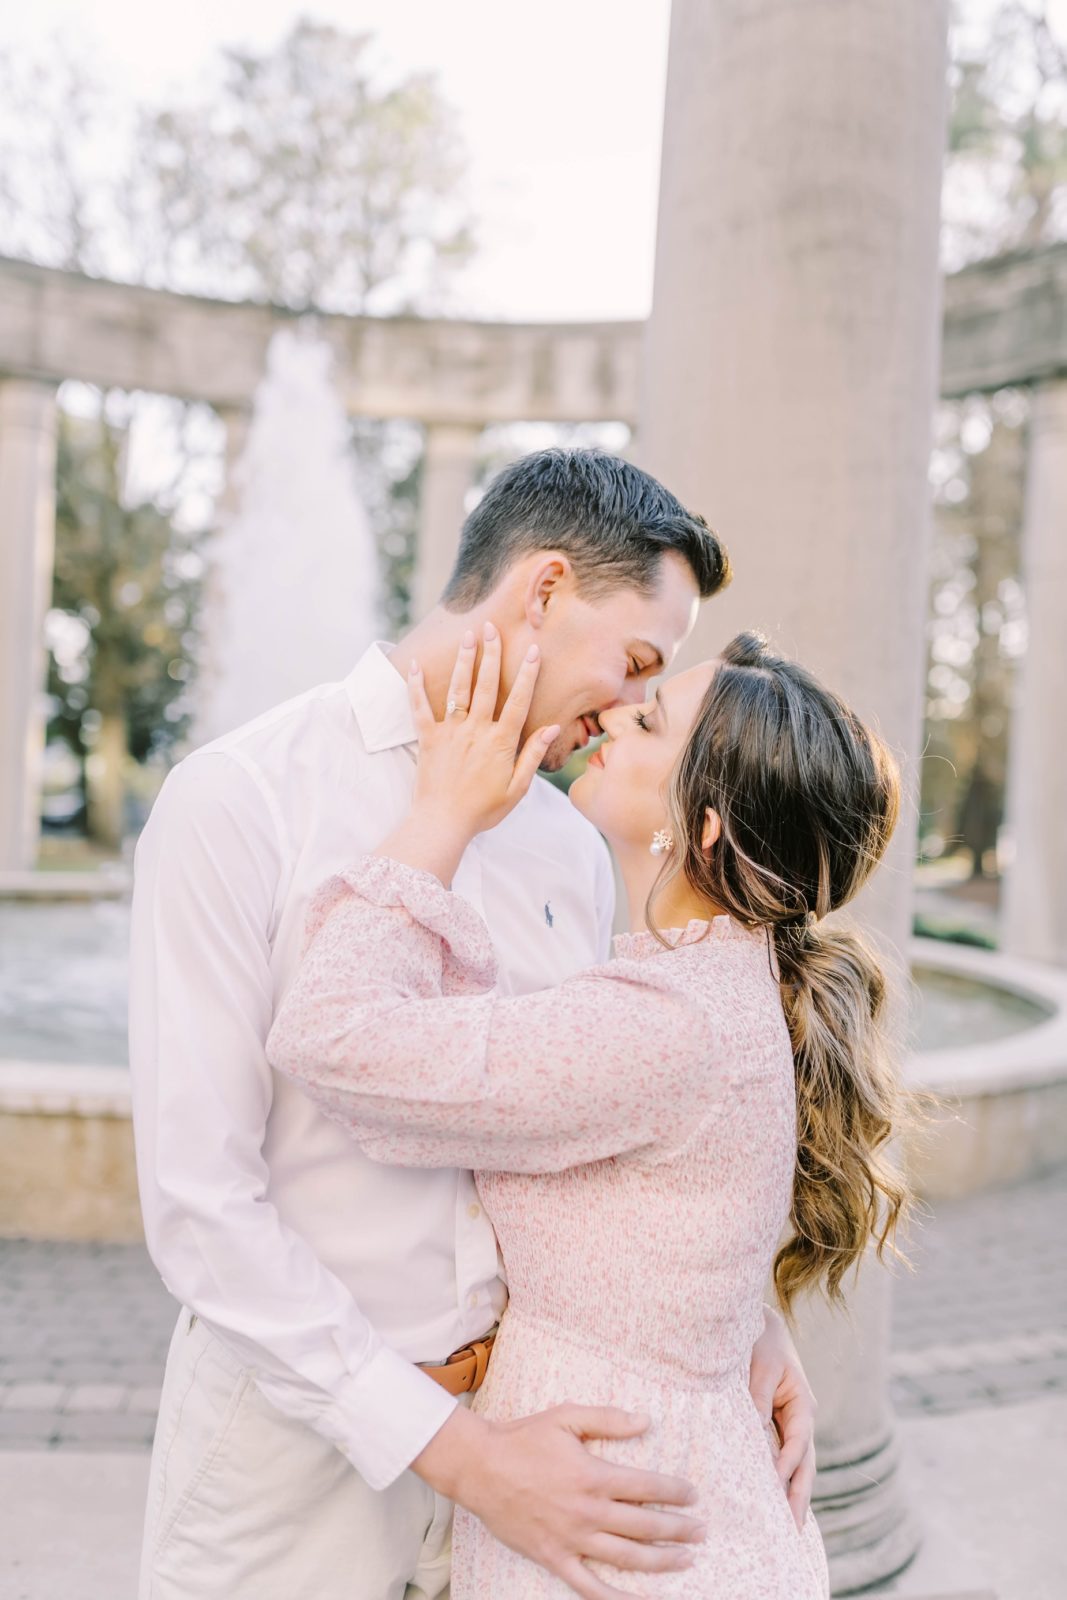 Engaged couple kisses in front of a fountain at Rice University by Christina Elliott Photography. engaged she said yes #christinaelliottphotography #Houstonengagements #riceuniversity #springengagements #sayIdo #Houstonengagementphotographers